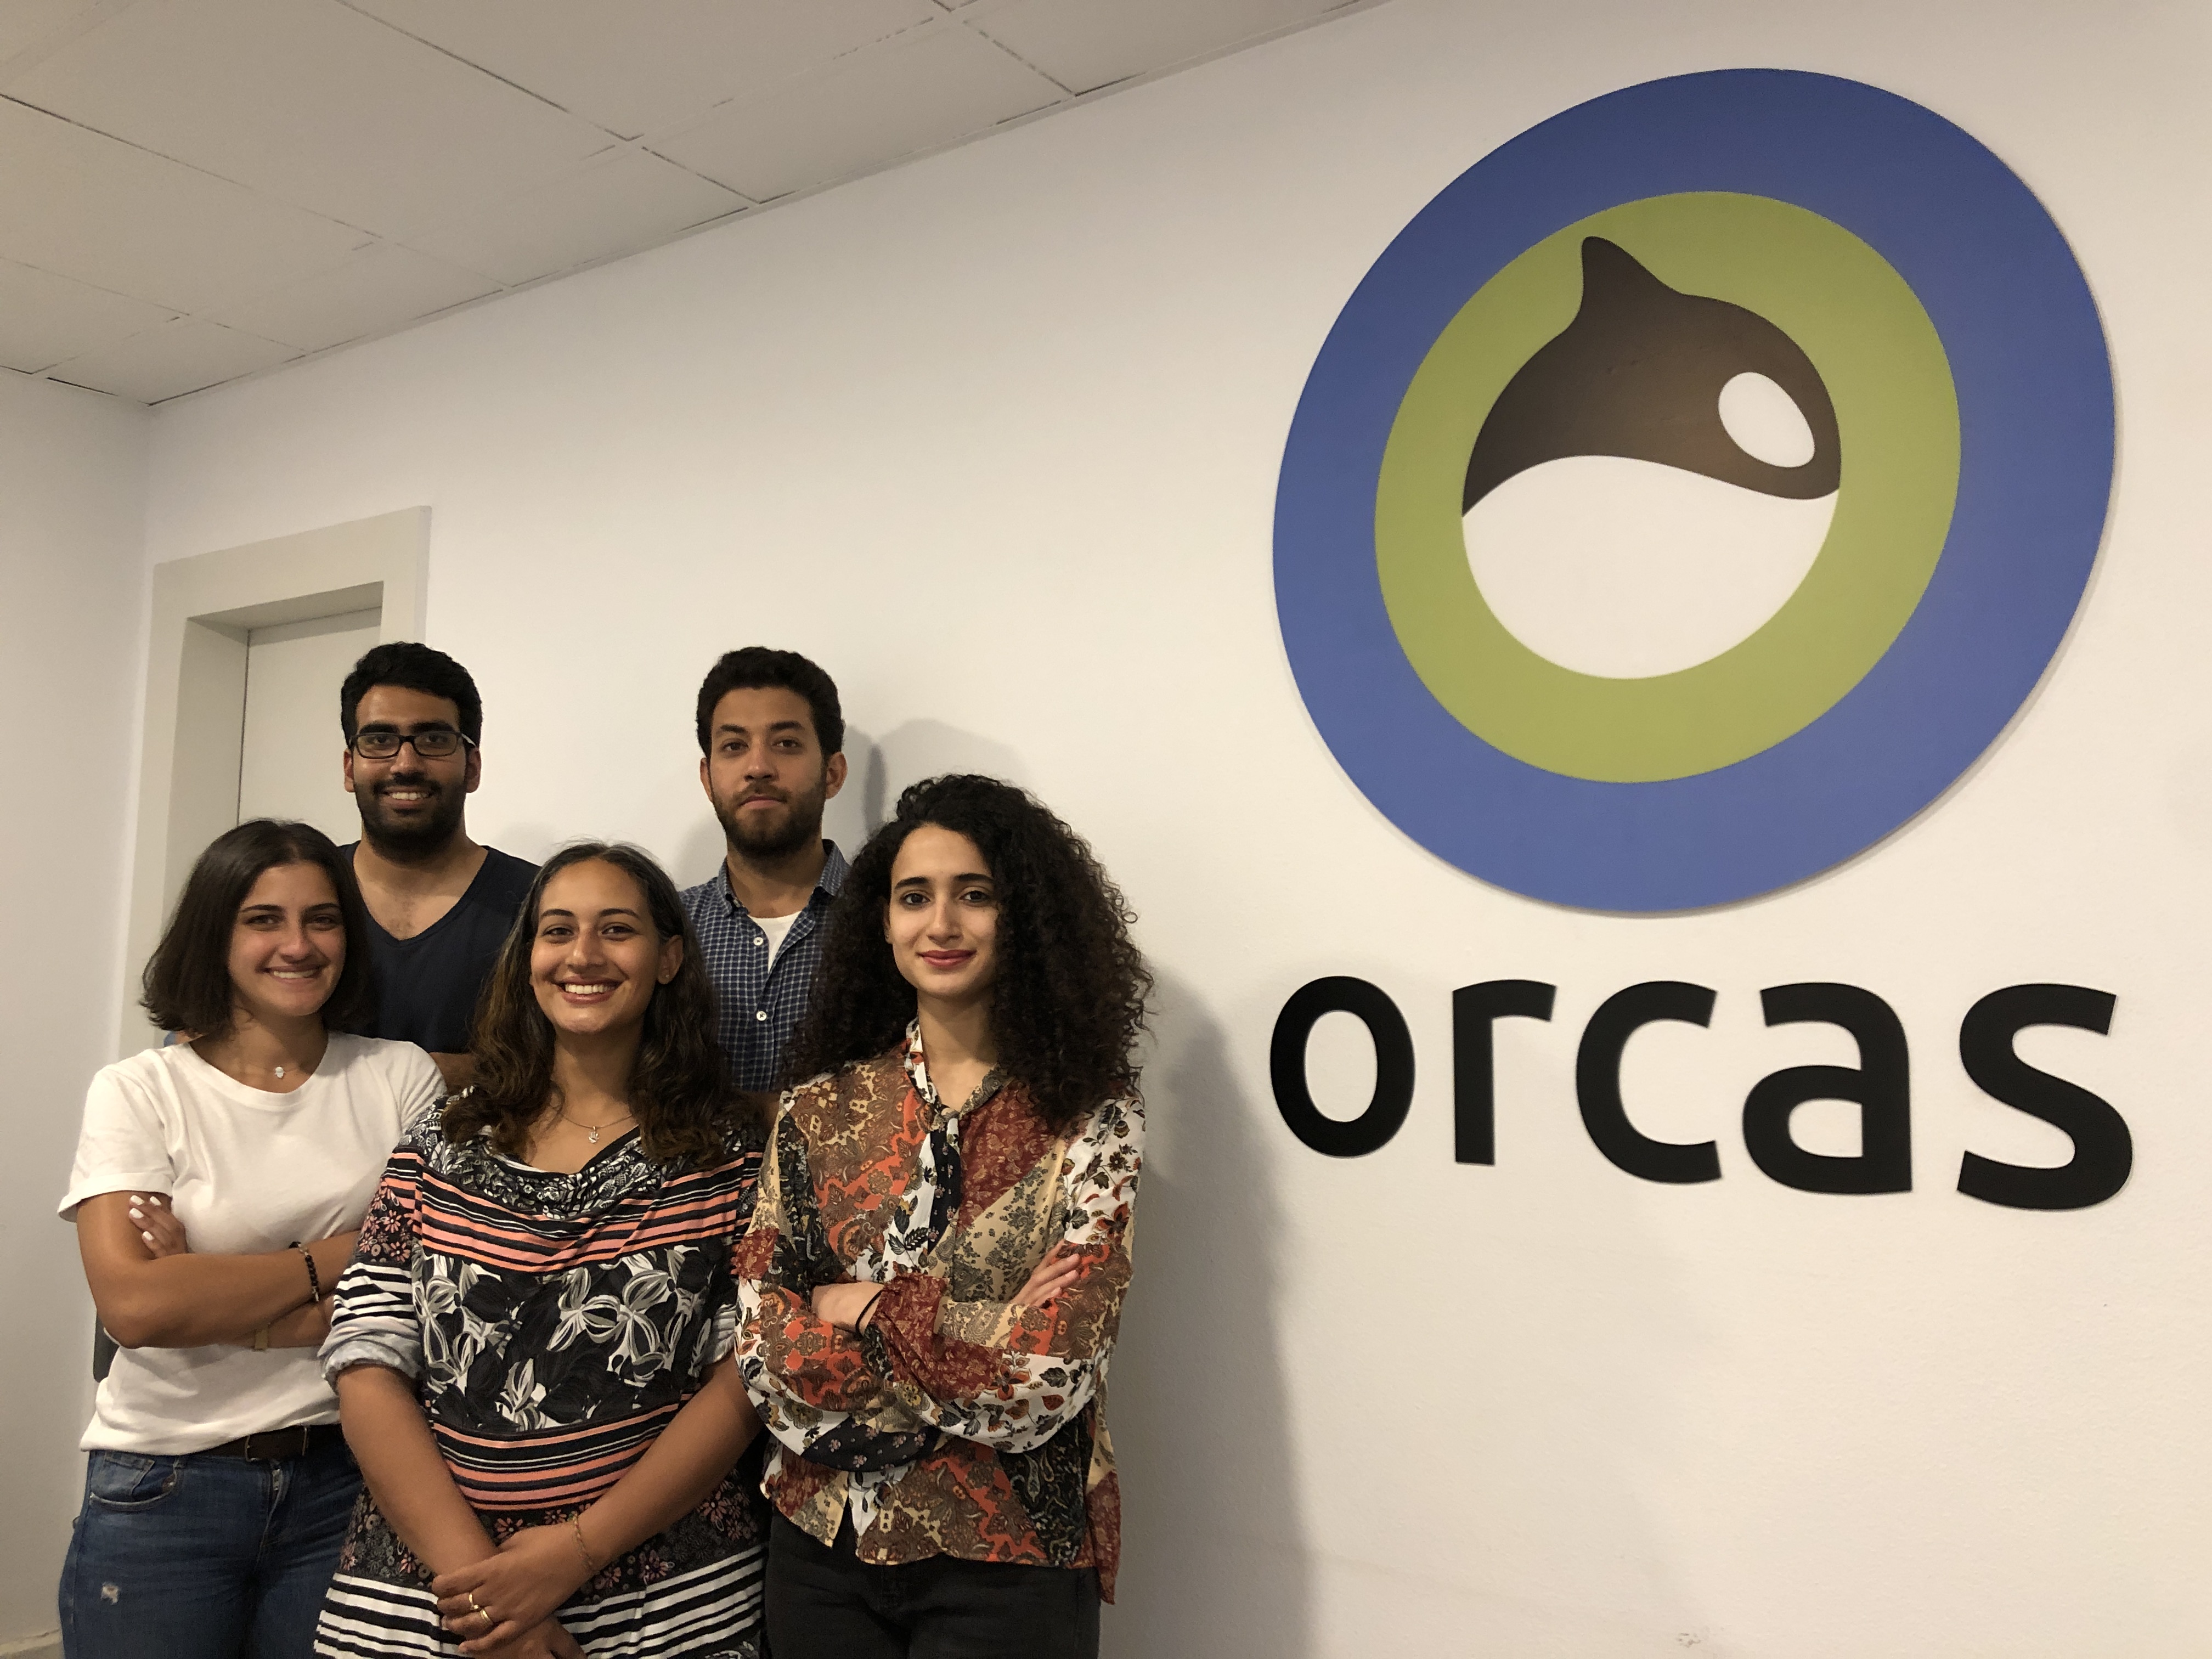 Orcas, ed-tech marketplace, raises $500K in pre-Series A round led by Algebra Ventures